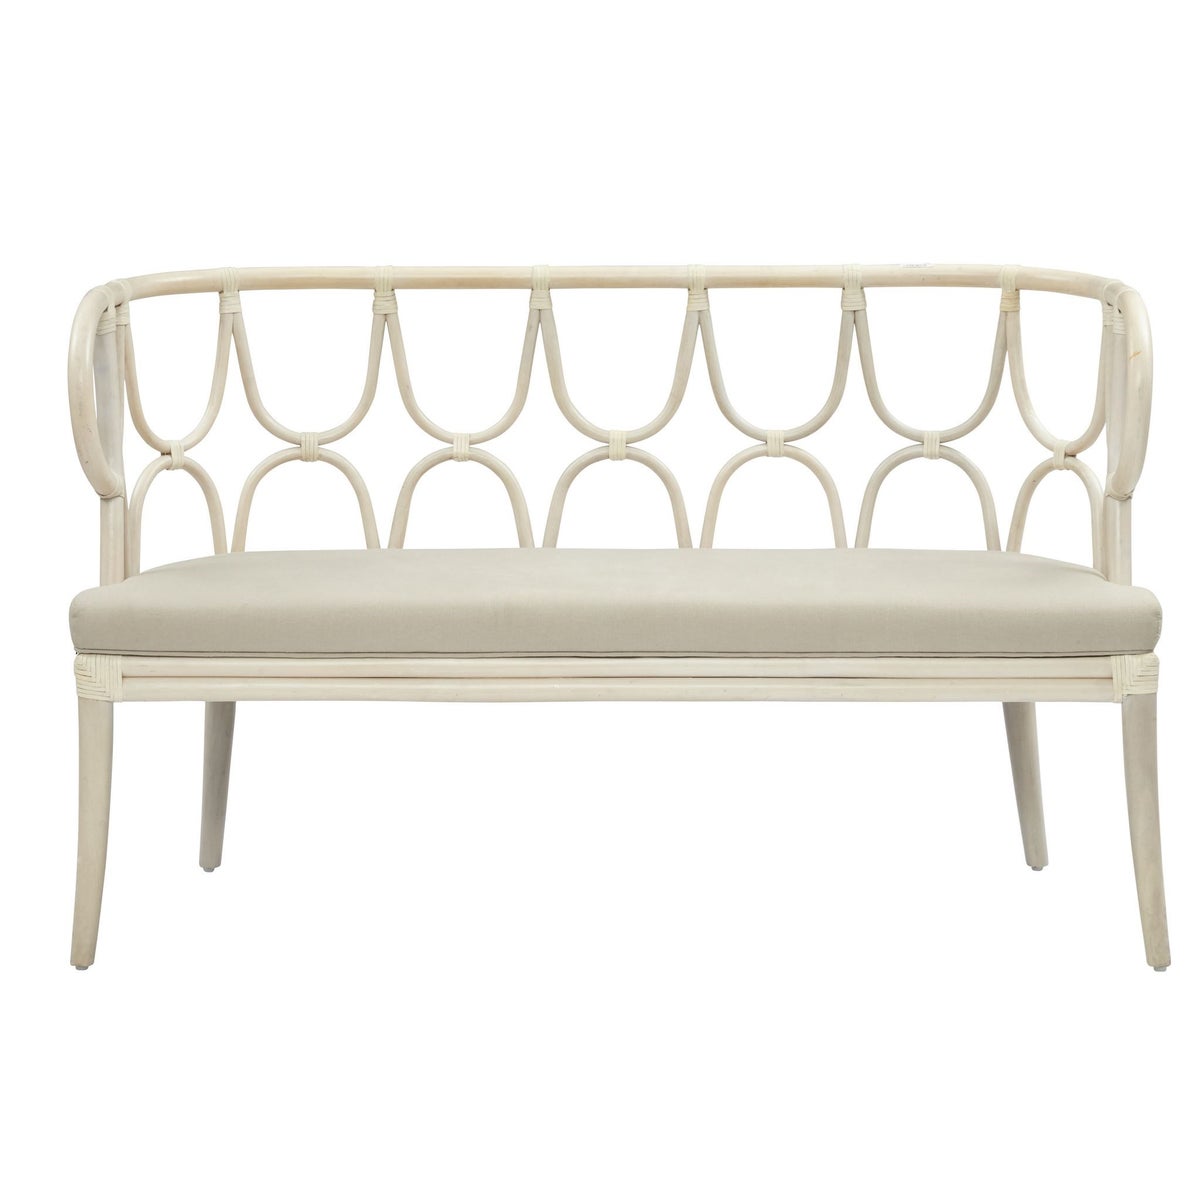 Simone Bench, Curved Back Frame Color - LinenCushion Color - Cream